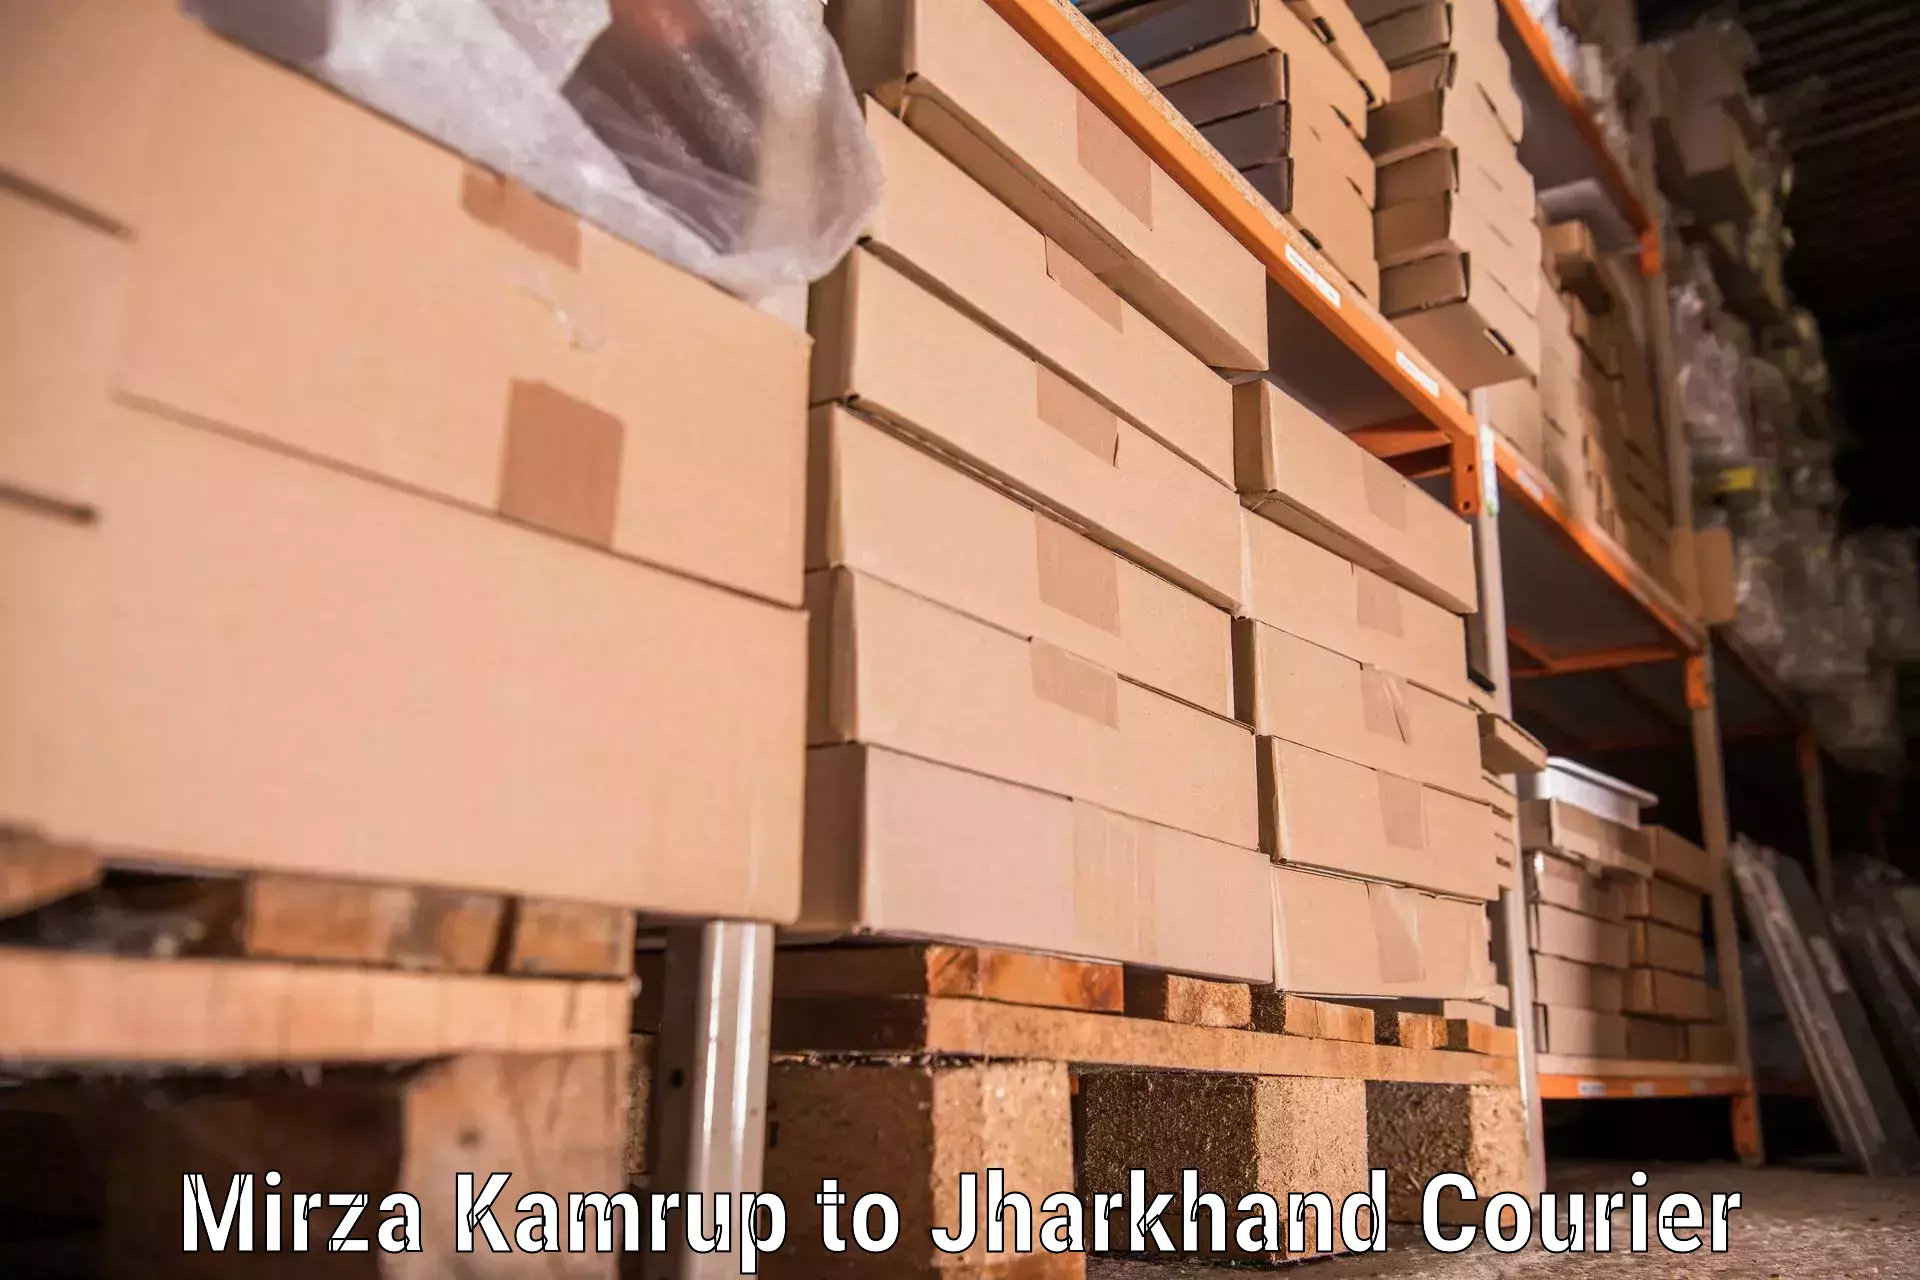 Moving and storage services Mirza Kamrup to Dhalbhumgarh